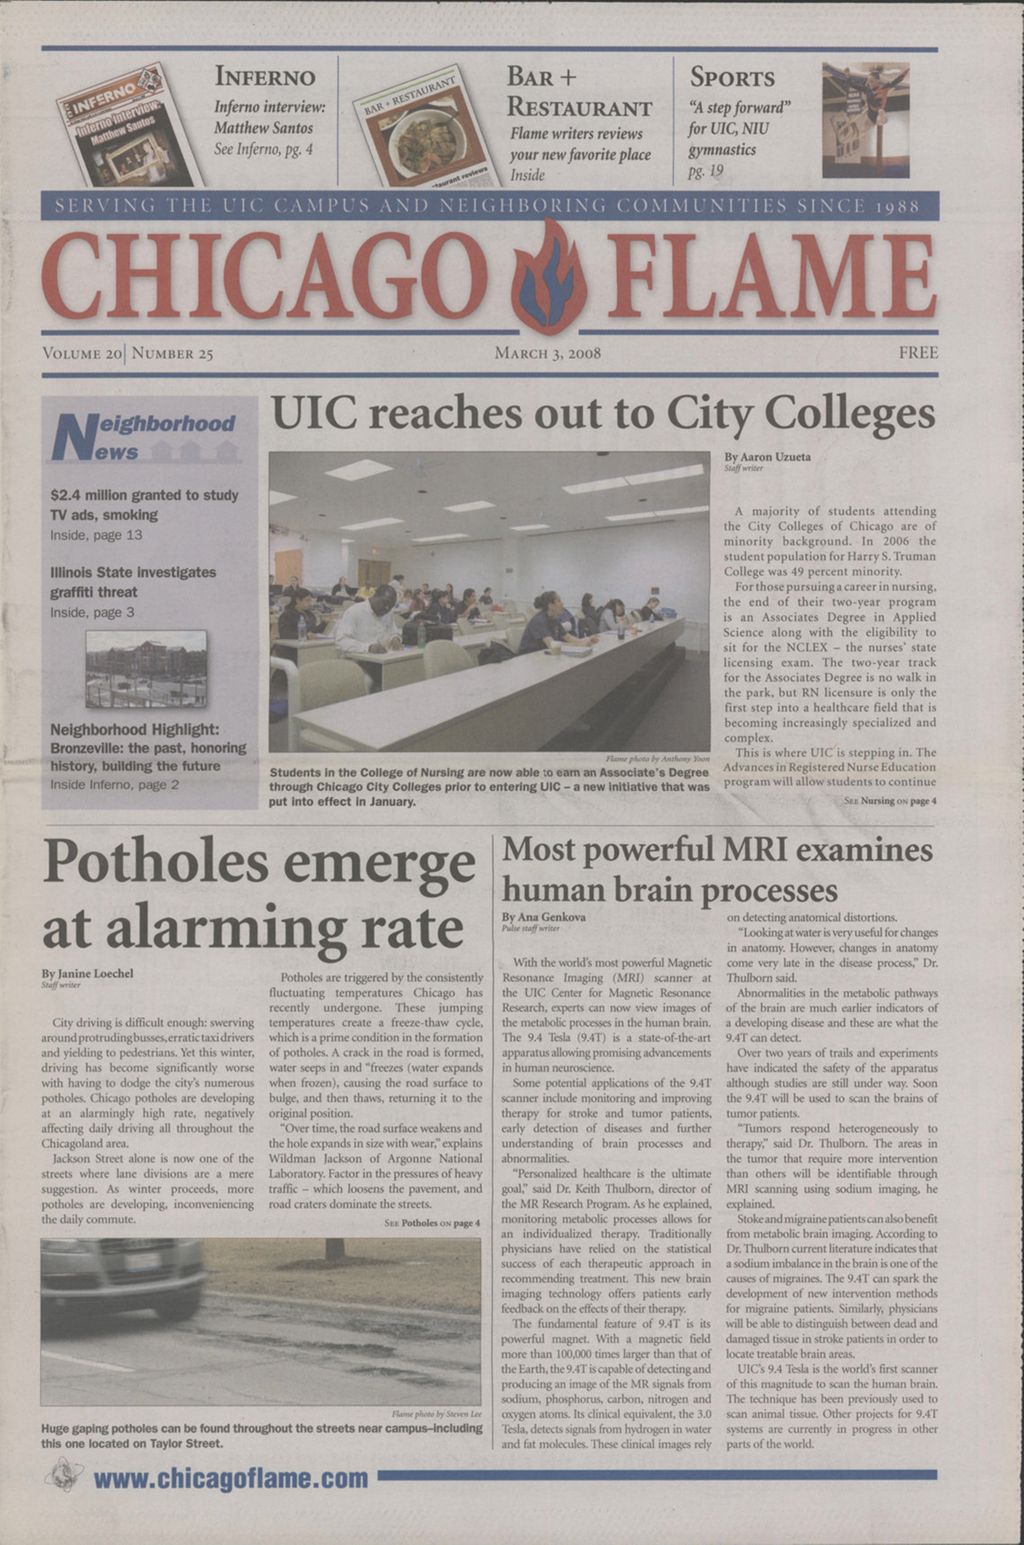 Miniature of Chicago Flame (March 3, 2008)